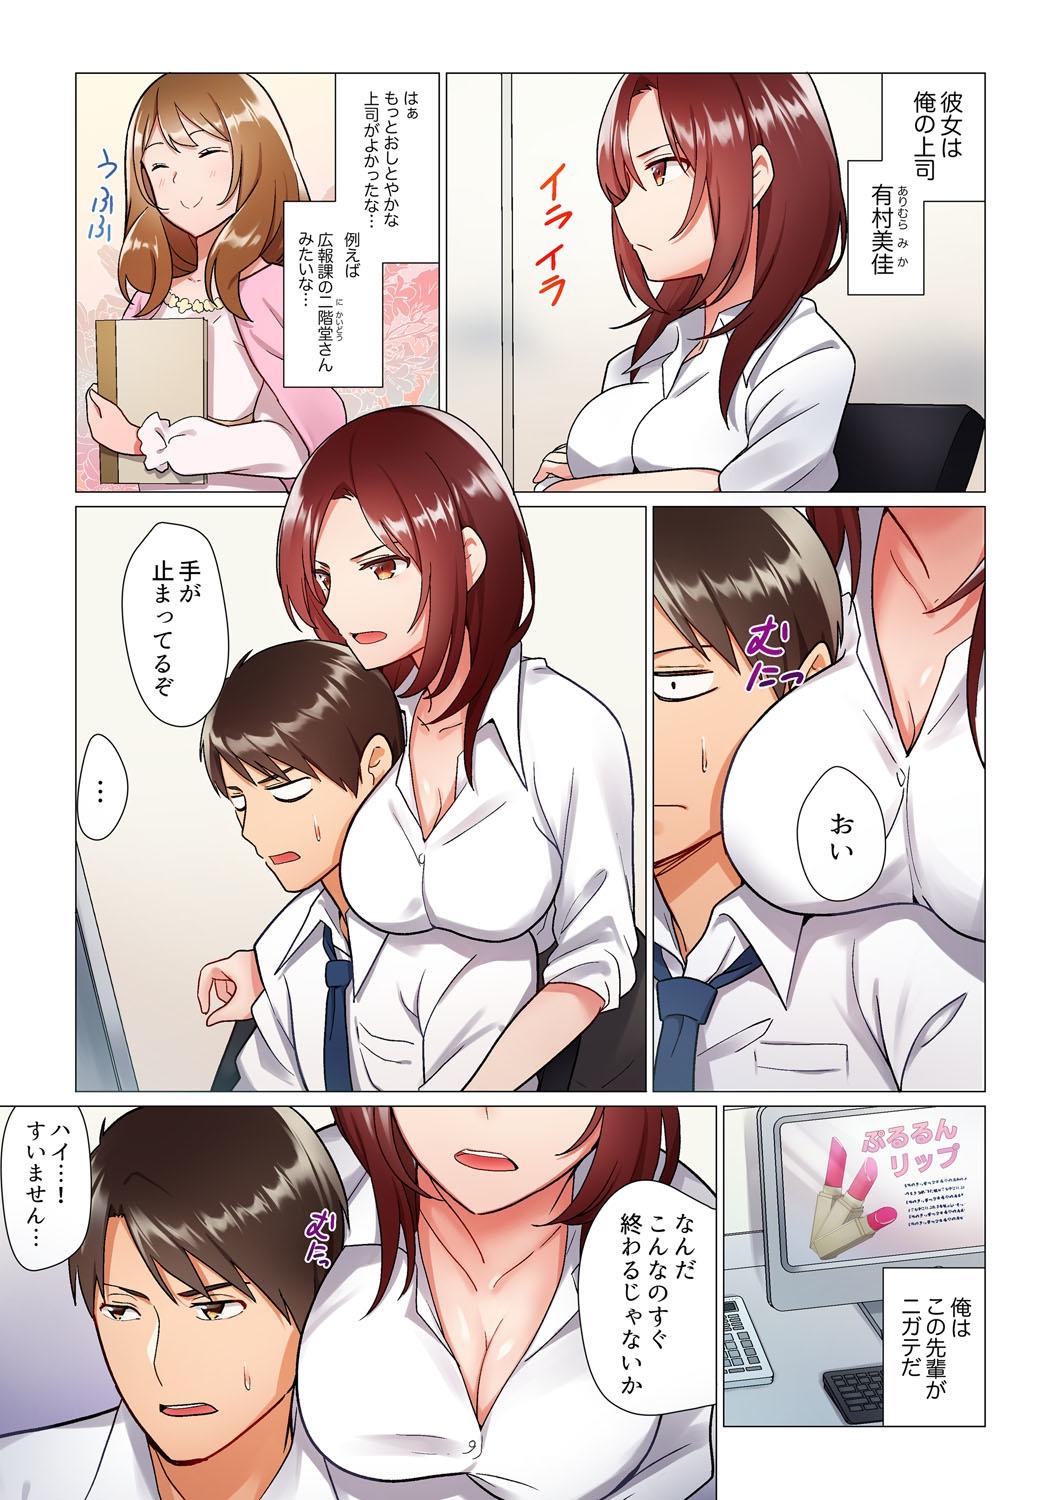 Rica 居眠り中の女上司にこっそり挿入（※寝たフリしながらイッてました）1-10 Young Old - Page 4